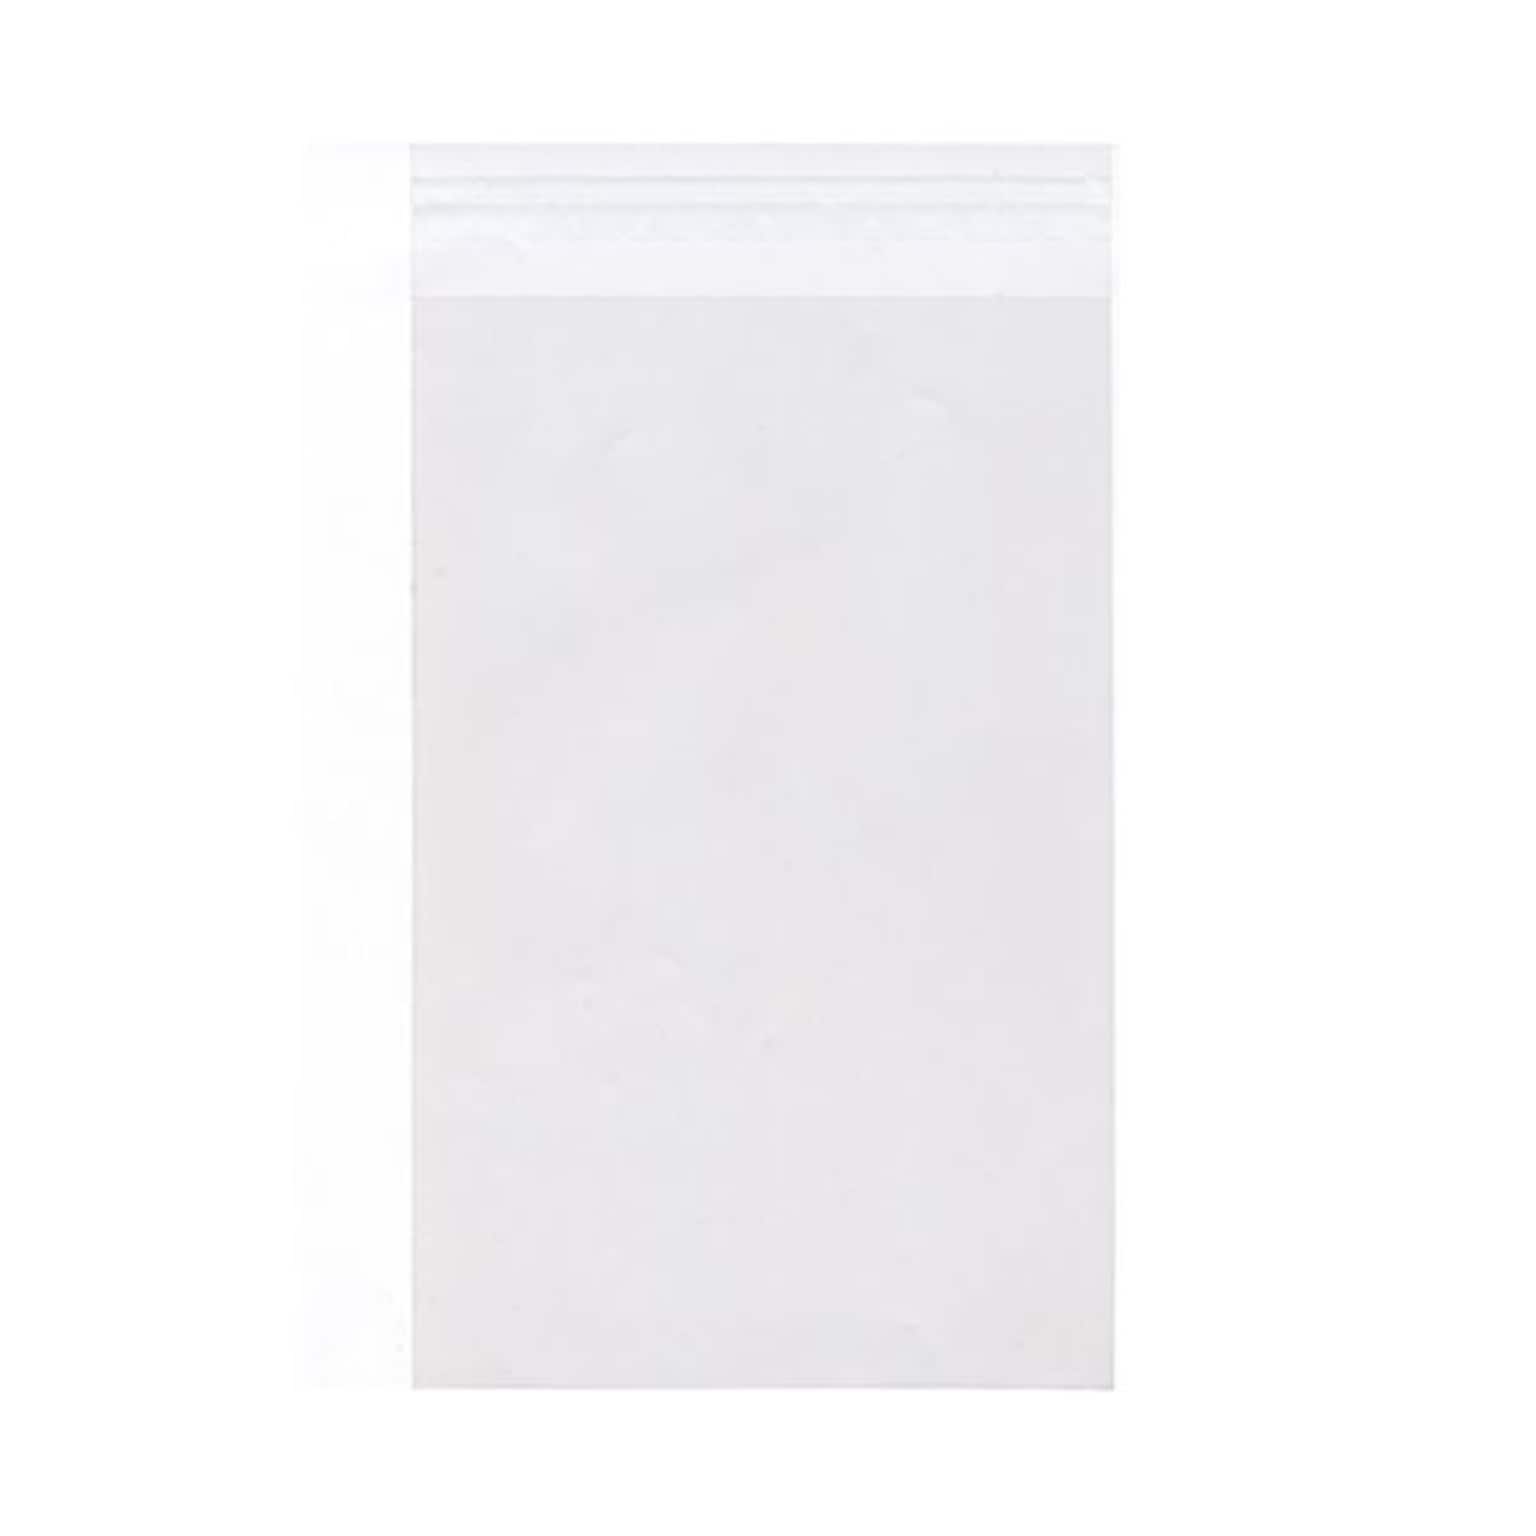 JAM Paper Cello Sleeves with Peel & Seal Closure, 9.25 x 12.25, Clear, 100/Pack (9.25X12.25CELLO)